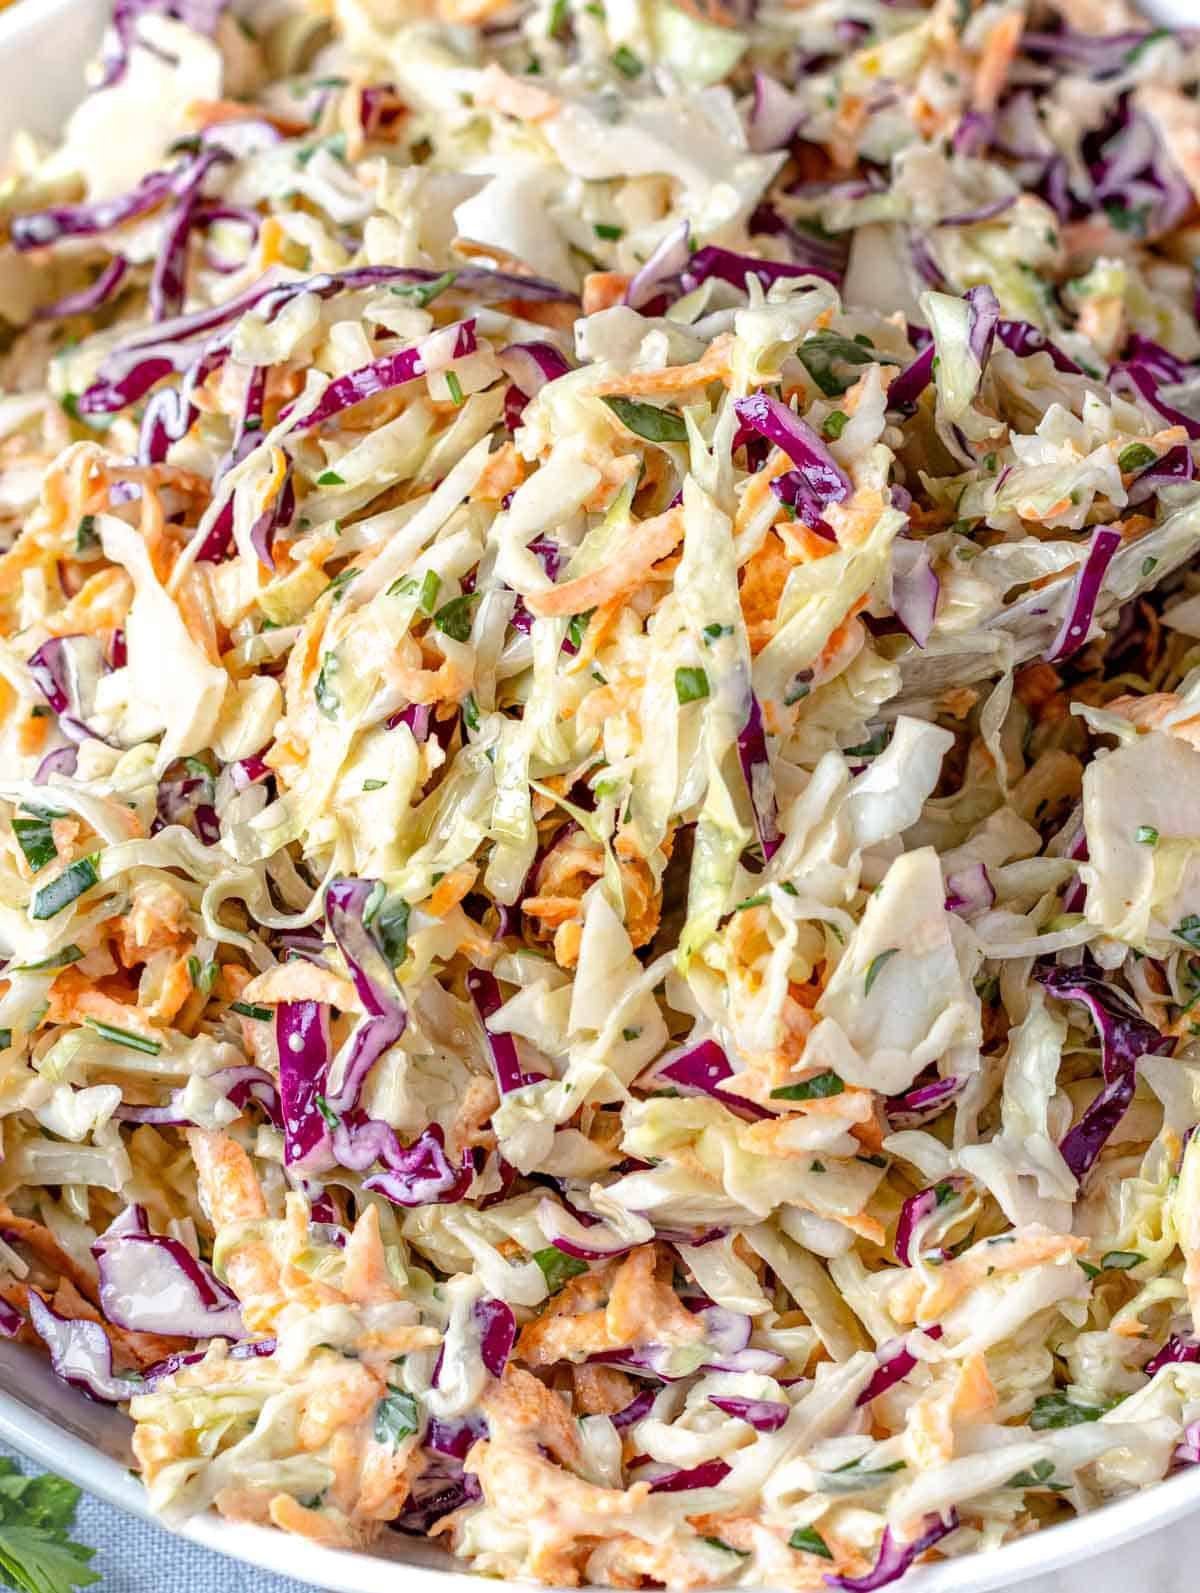 Coleslaw served in a white bowl